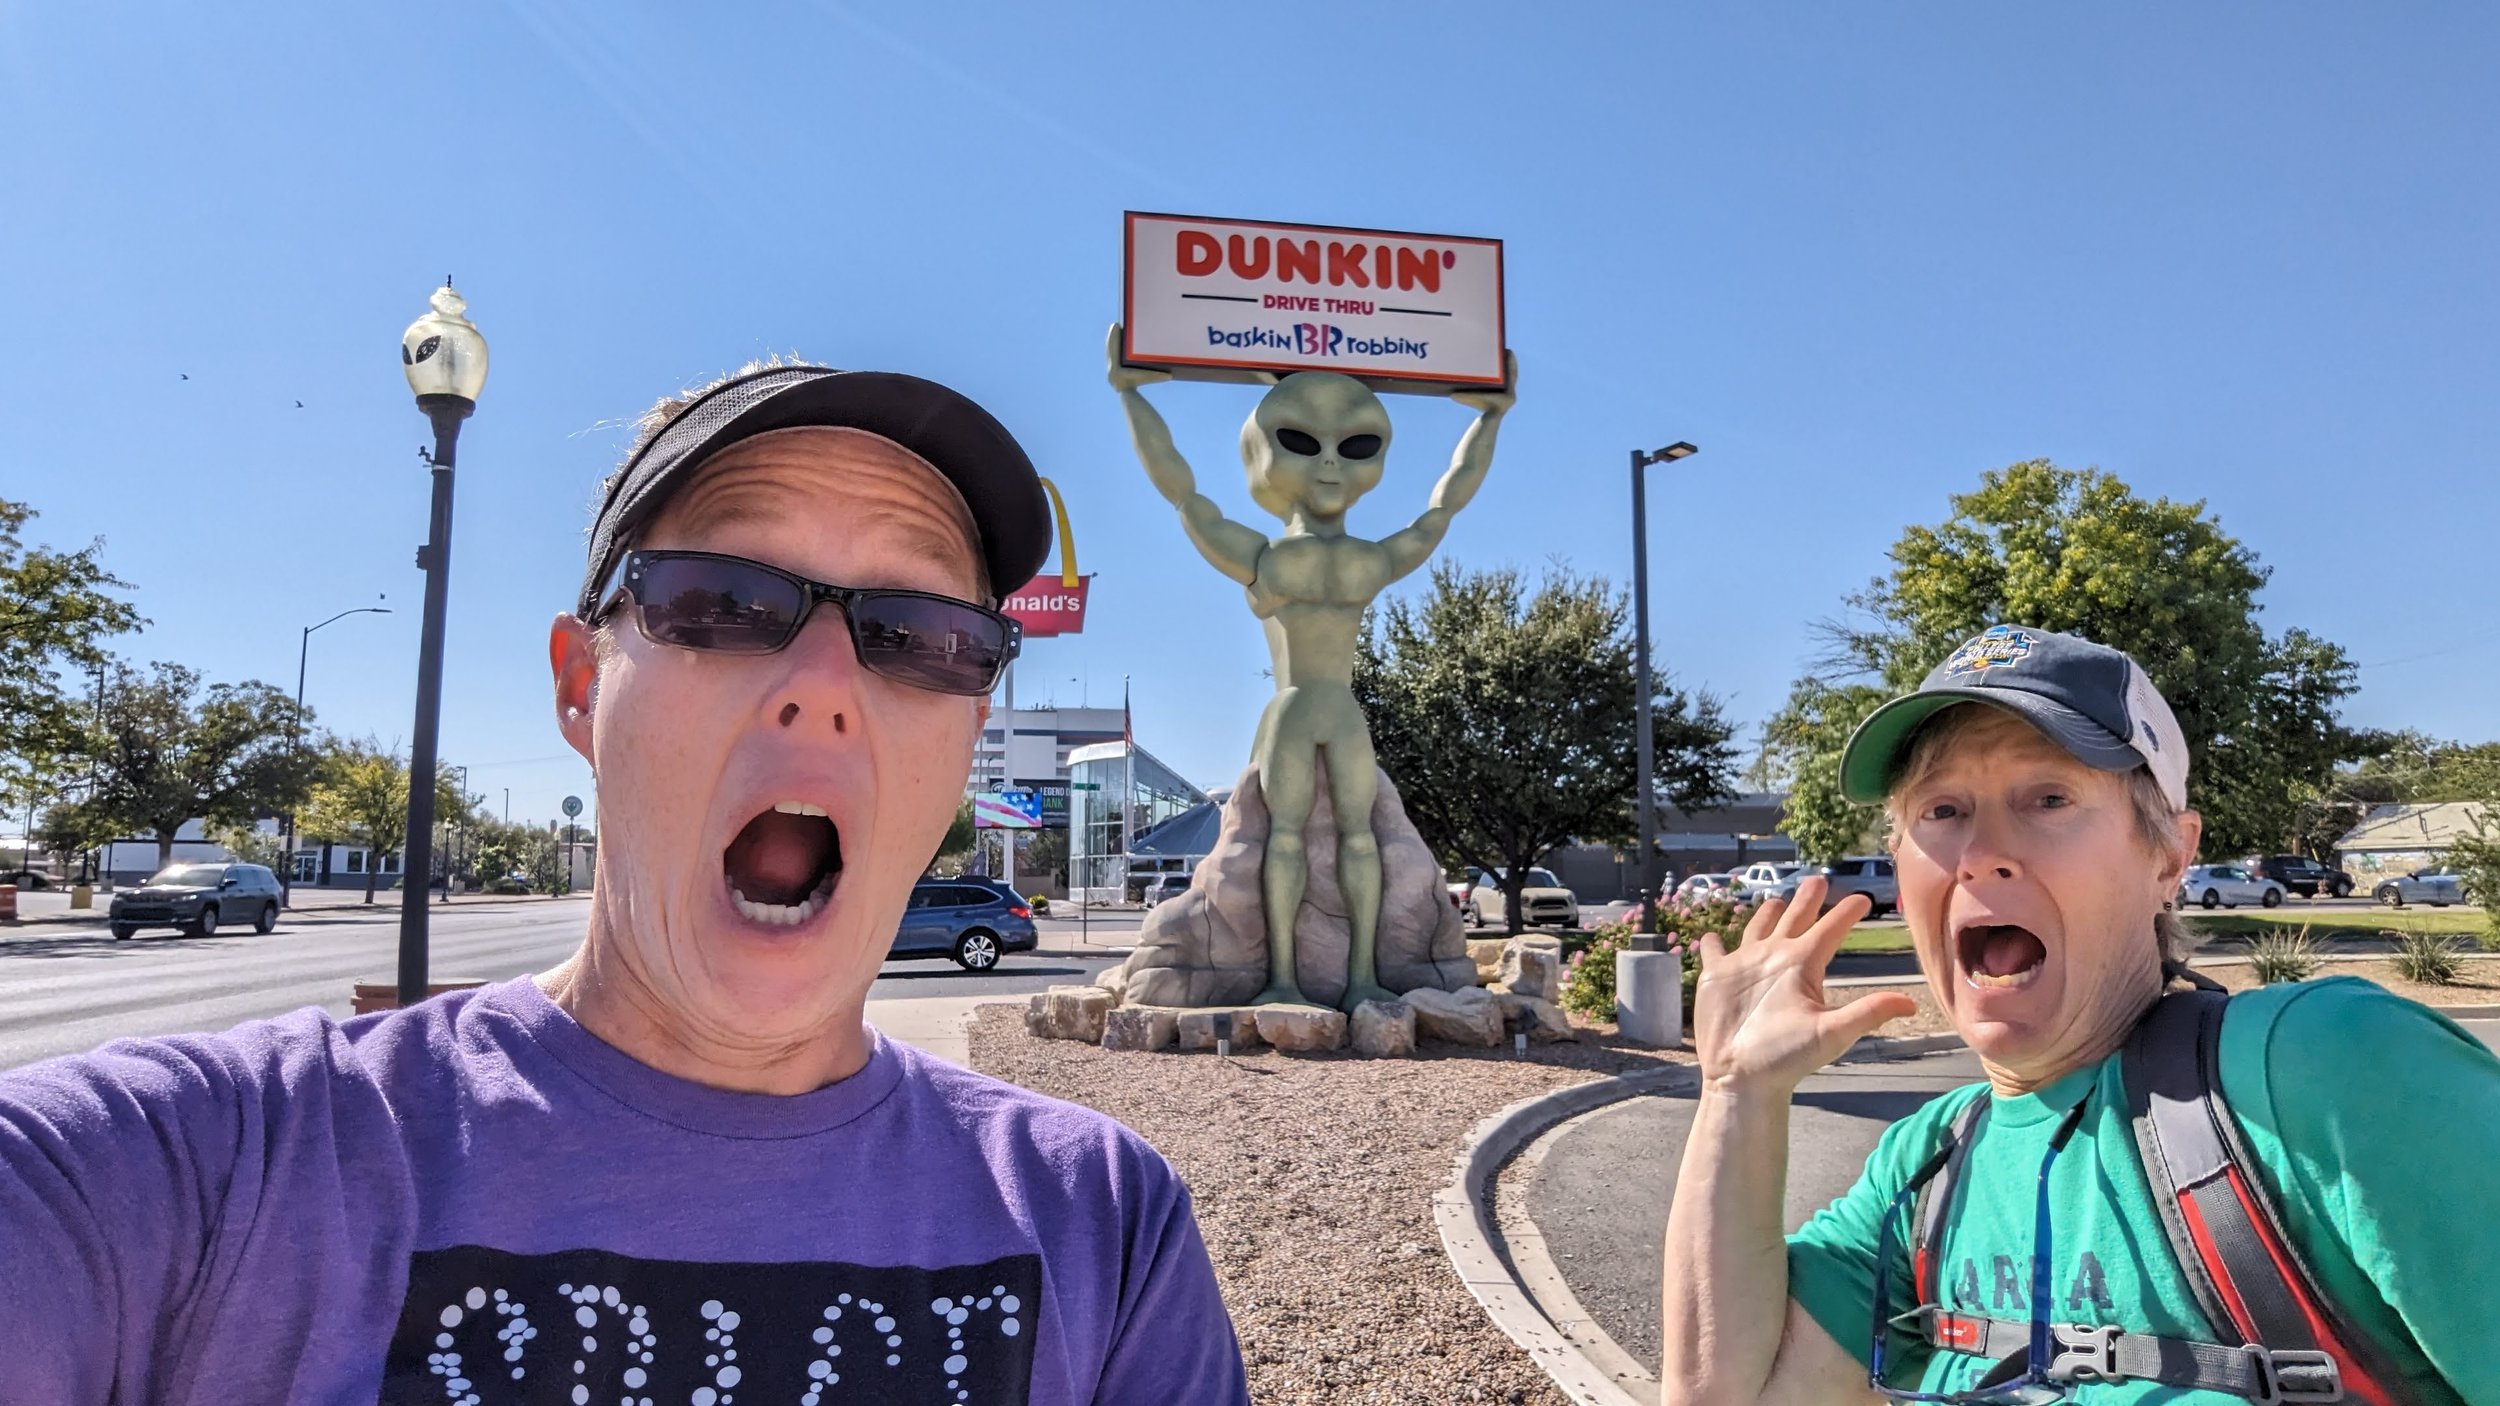 Alien Dunkin Donuts in Roswell New Mexico